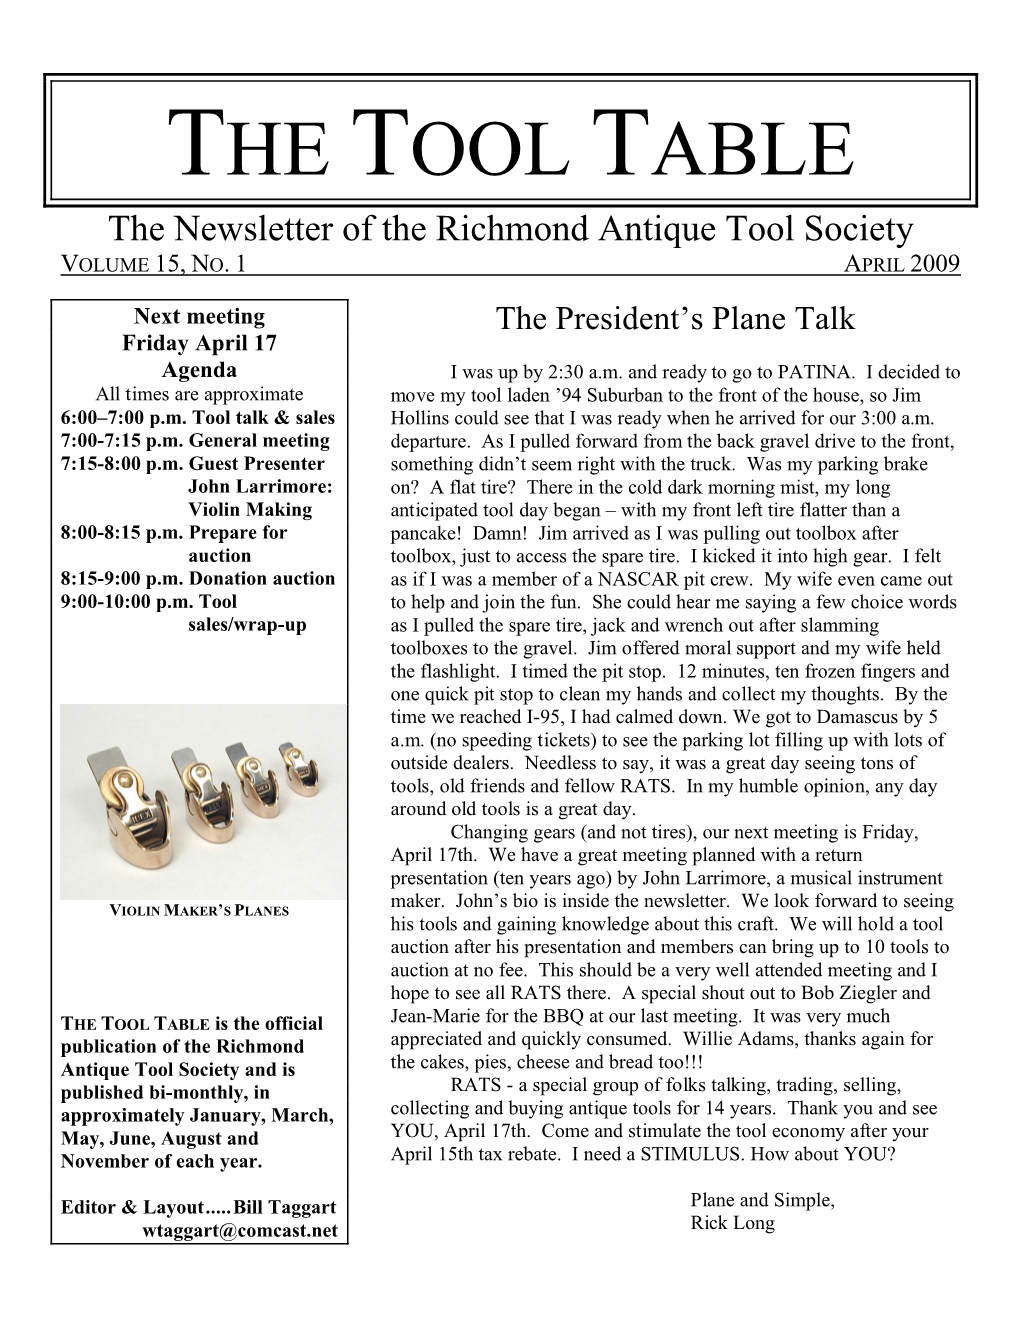 THE TOOL TABLE the Newsletter of the Richmond Antique Tool Society VOLUME 15, NO